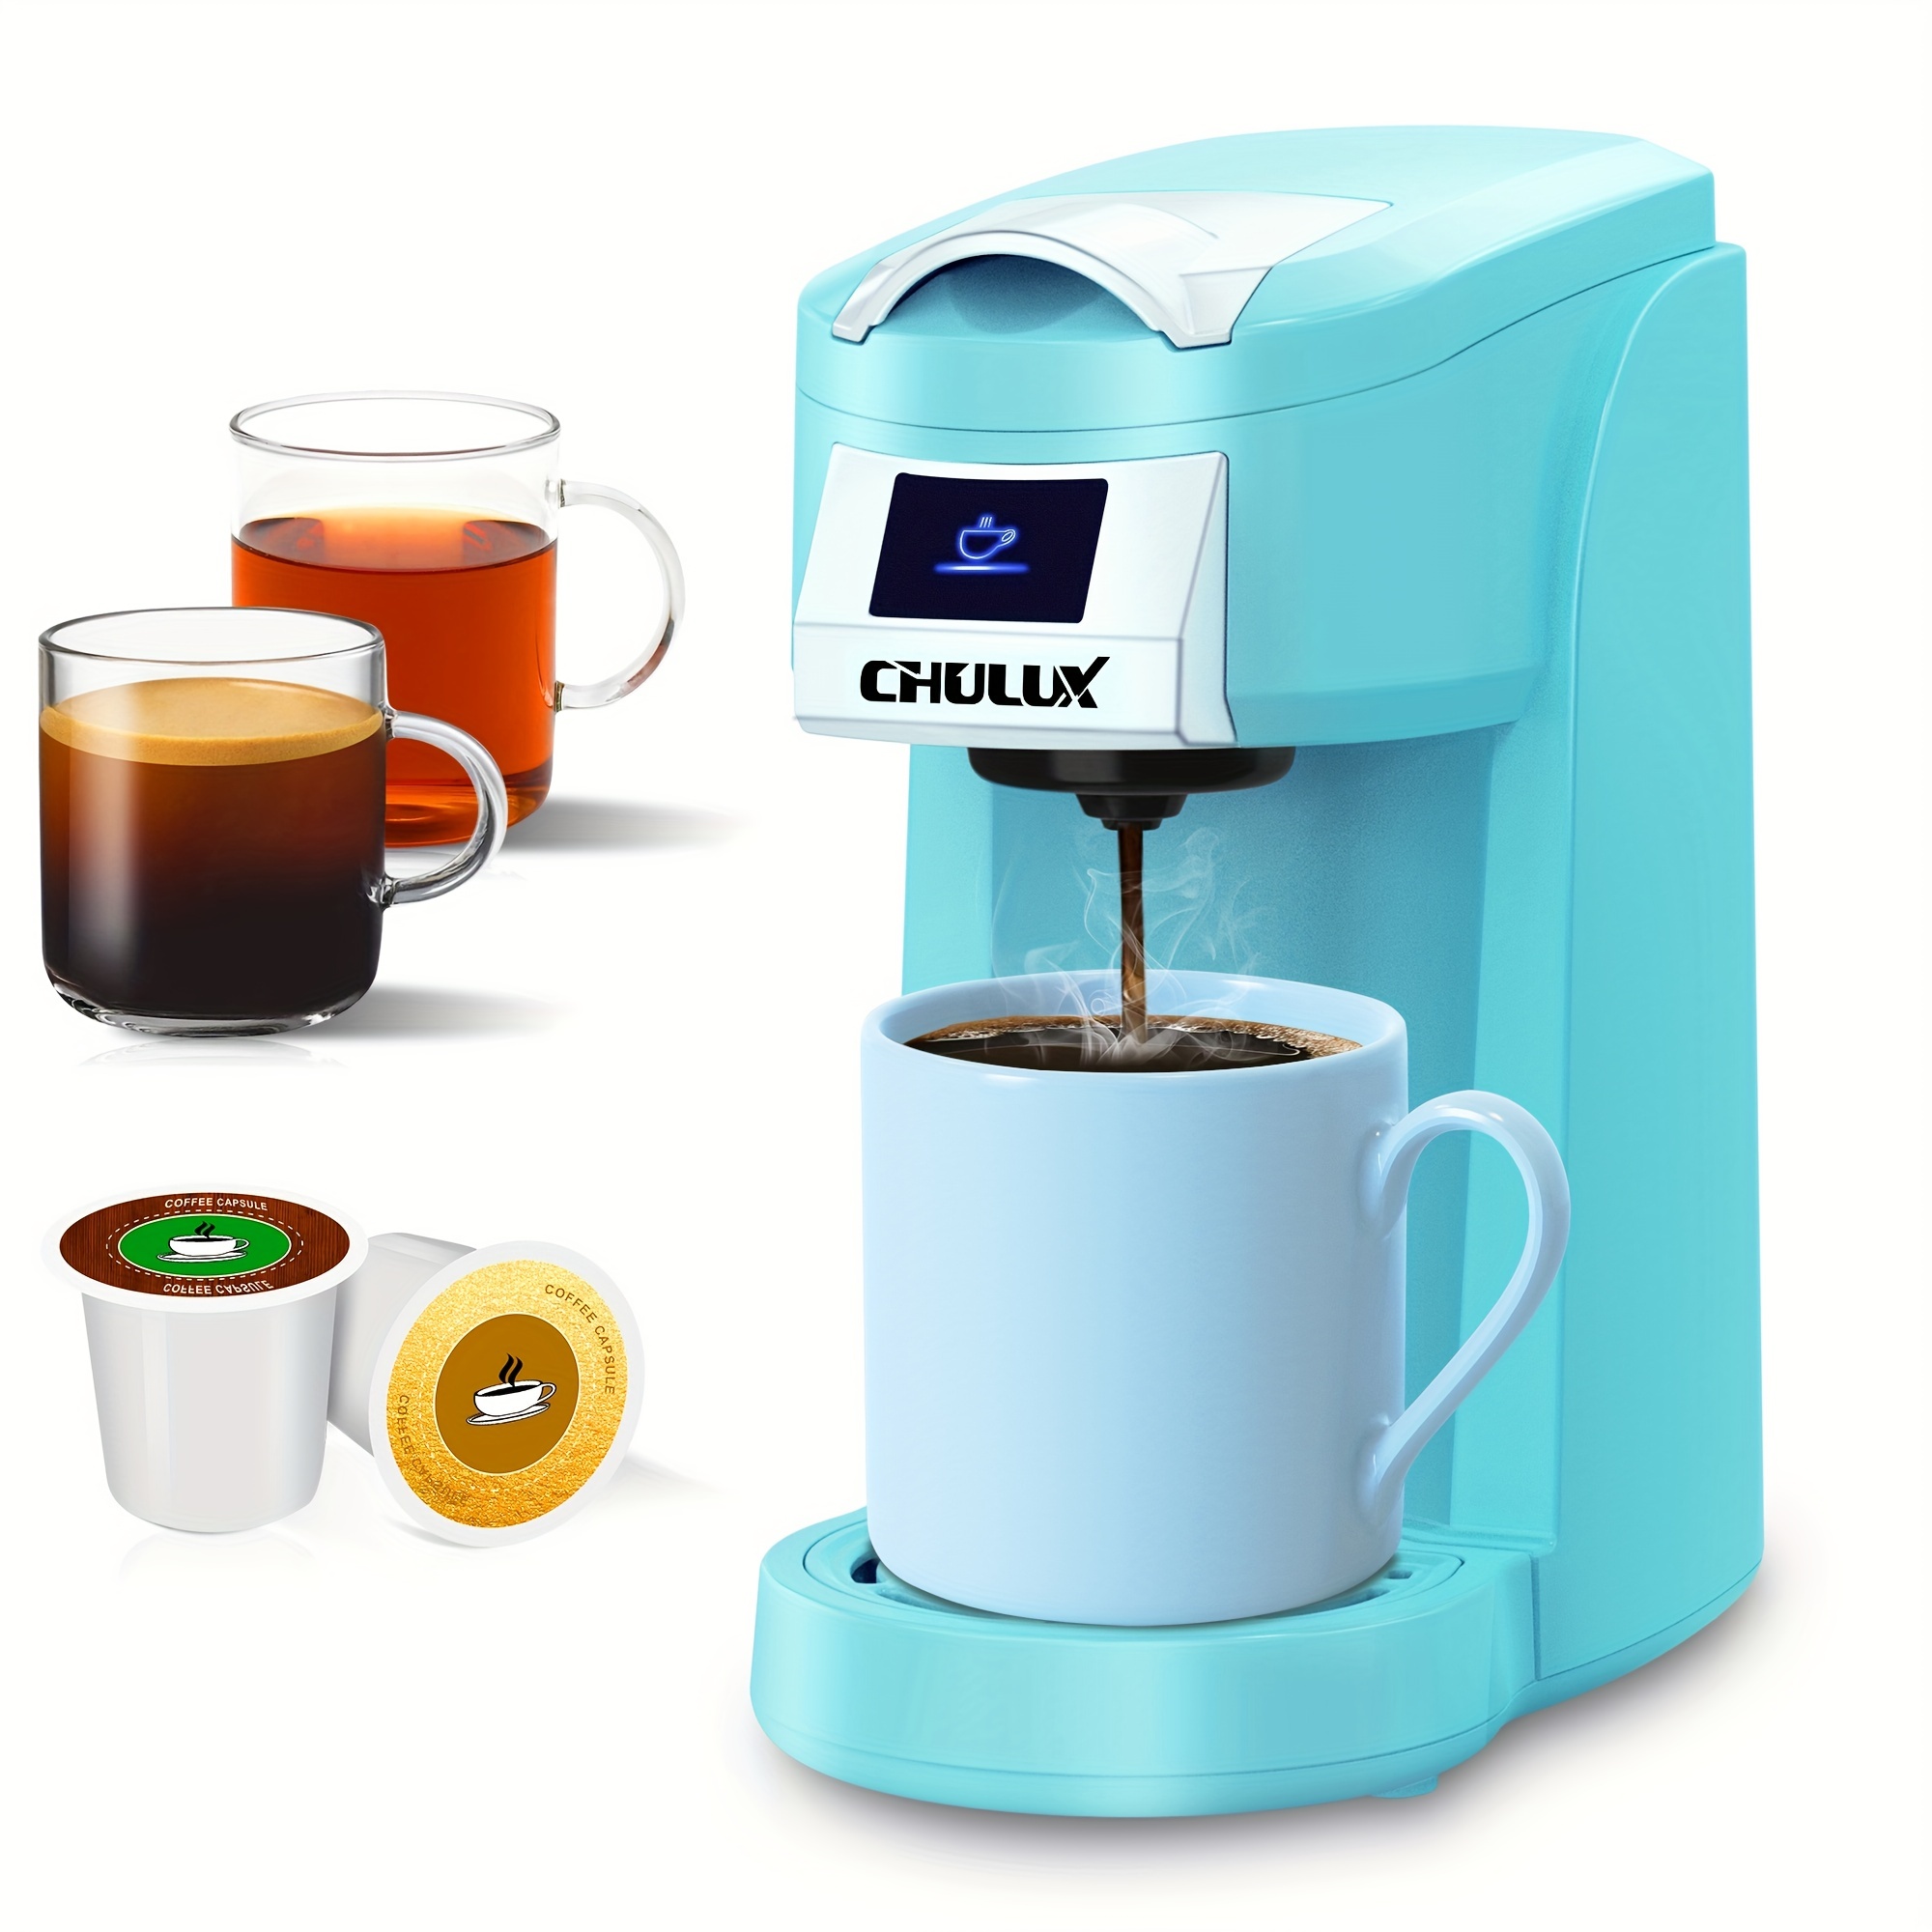 1pc capsule coffee maker chulux upgrade single serve coffee maker for k cup mini coffee maker single cup 5 12oz coffee brewer 3 in 1 coffee machine for k cups pod capsule ground coffee tea one touch fast brewing in minutes coffee accessories details 1